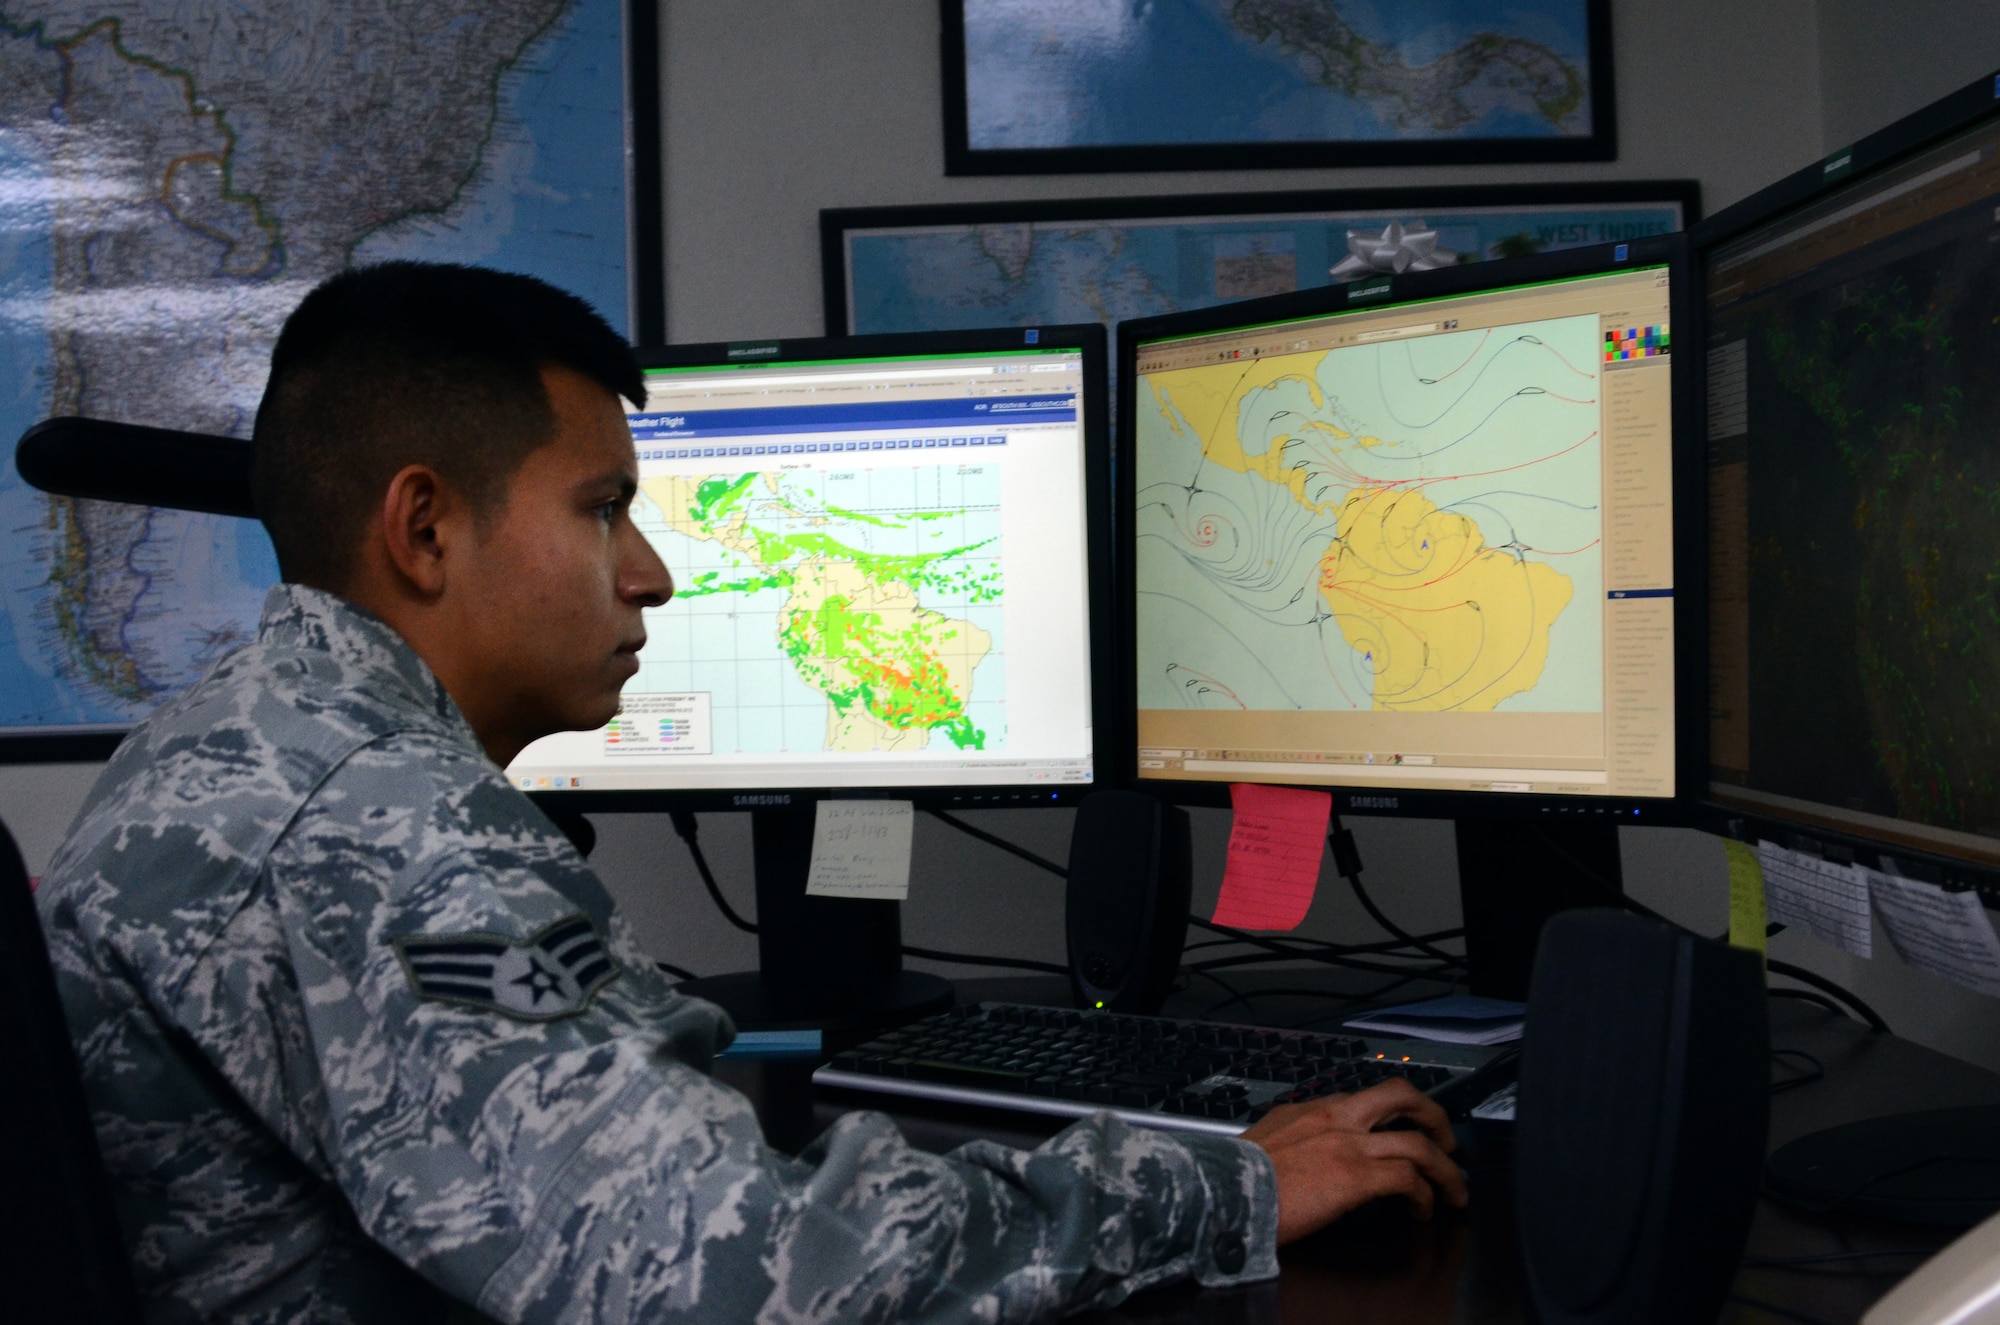 Senior Airman Savas Rivera, a regional weather forecaster/special support forecaster assigned to the 612th Support Squadron, uses several programs to analyze the atmosphere and monitor weather patterns on Davis-Monthan AFB, Ariz., Dec. 5, 2013.  Rivera uses the programs to create forecasts for the forward operating locations within the U.S. Southern Command area of responsibility.   (U.S. Air Force photo by Staff Sgt. Heather R. Redman/Released)